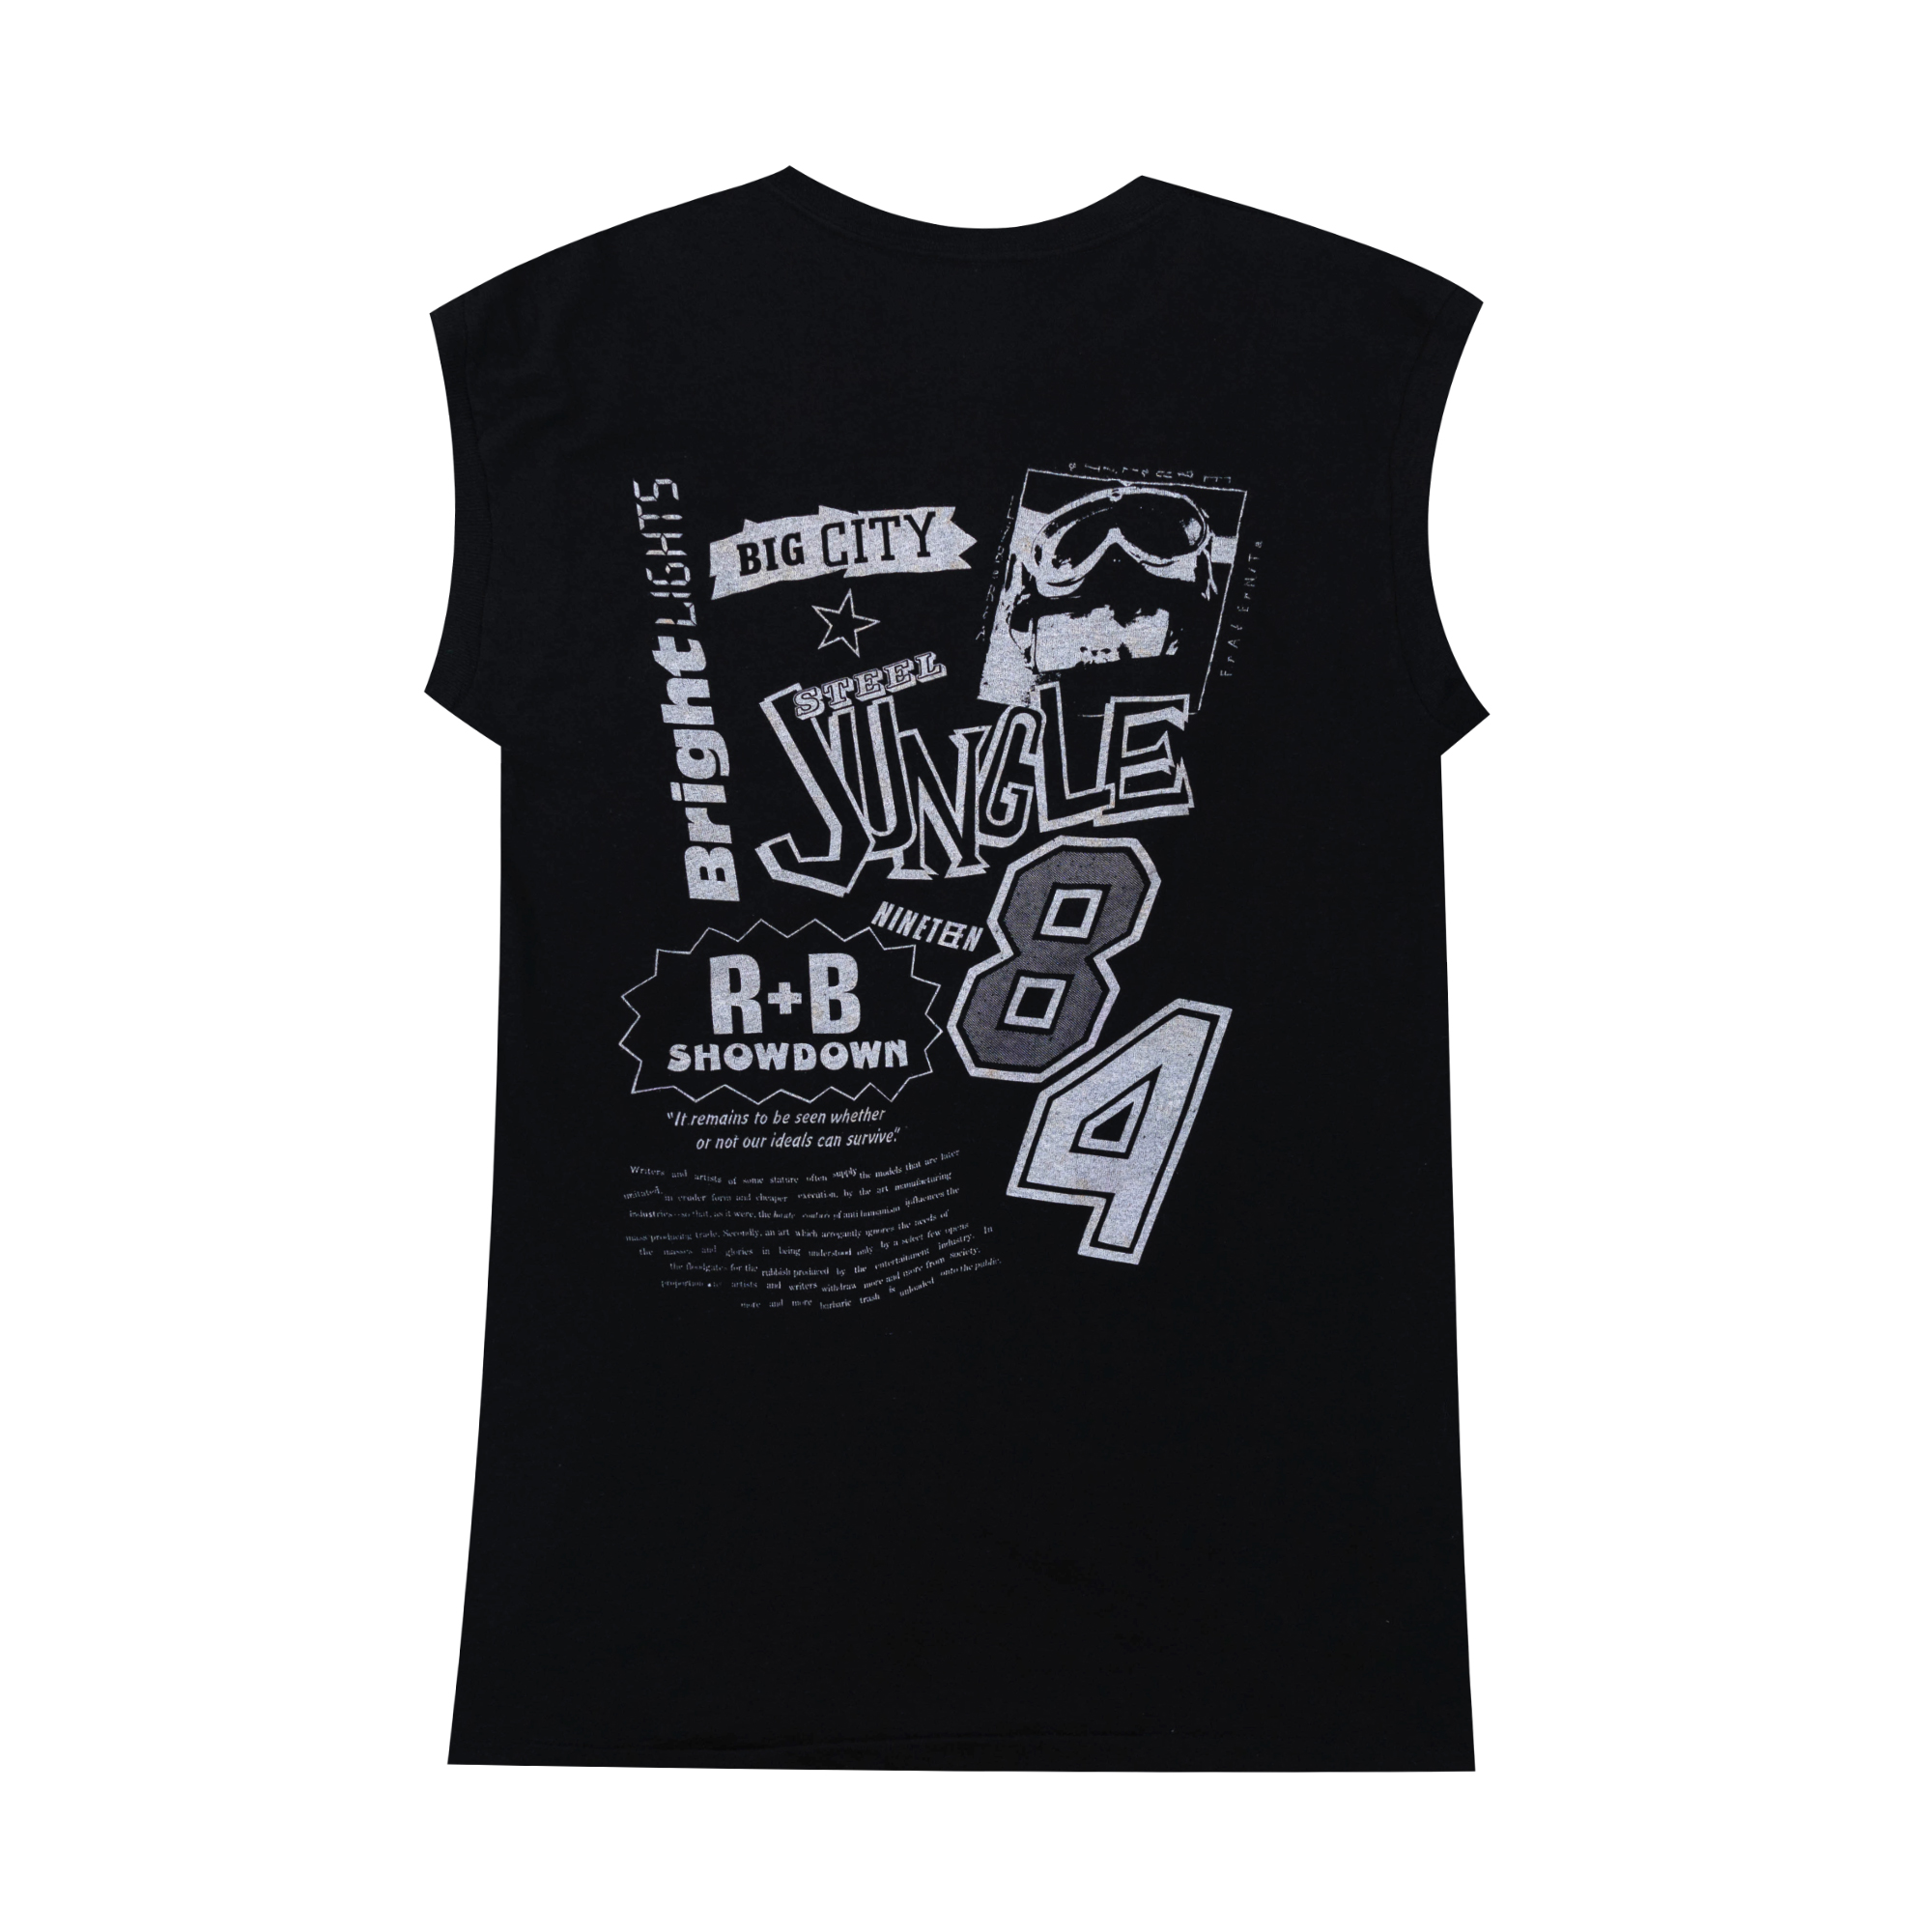 The Clash "Out of Control" 1984 Tank Top Black-PLUS